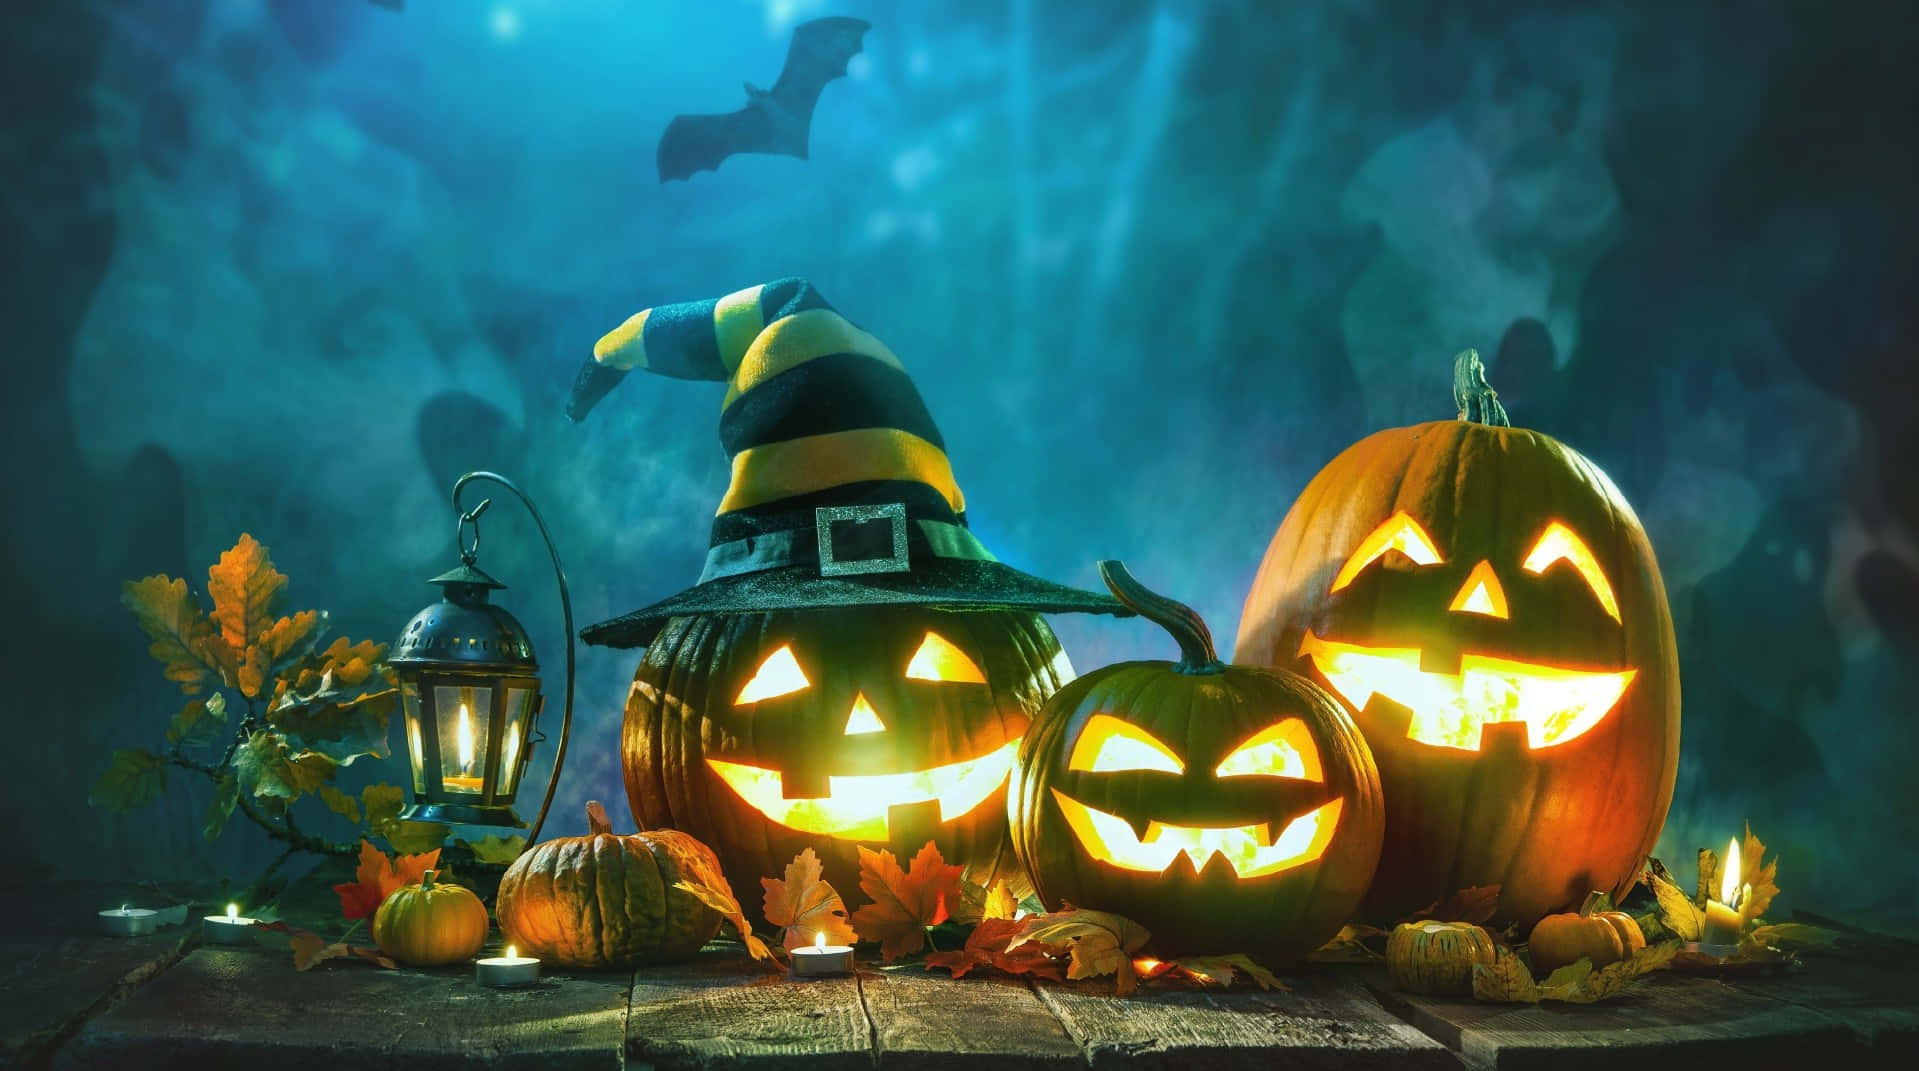 Enter the Halloween Spirit with these Fun Games! Wallpaper